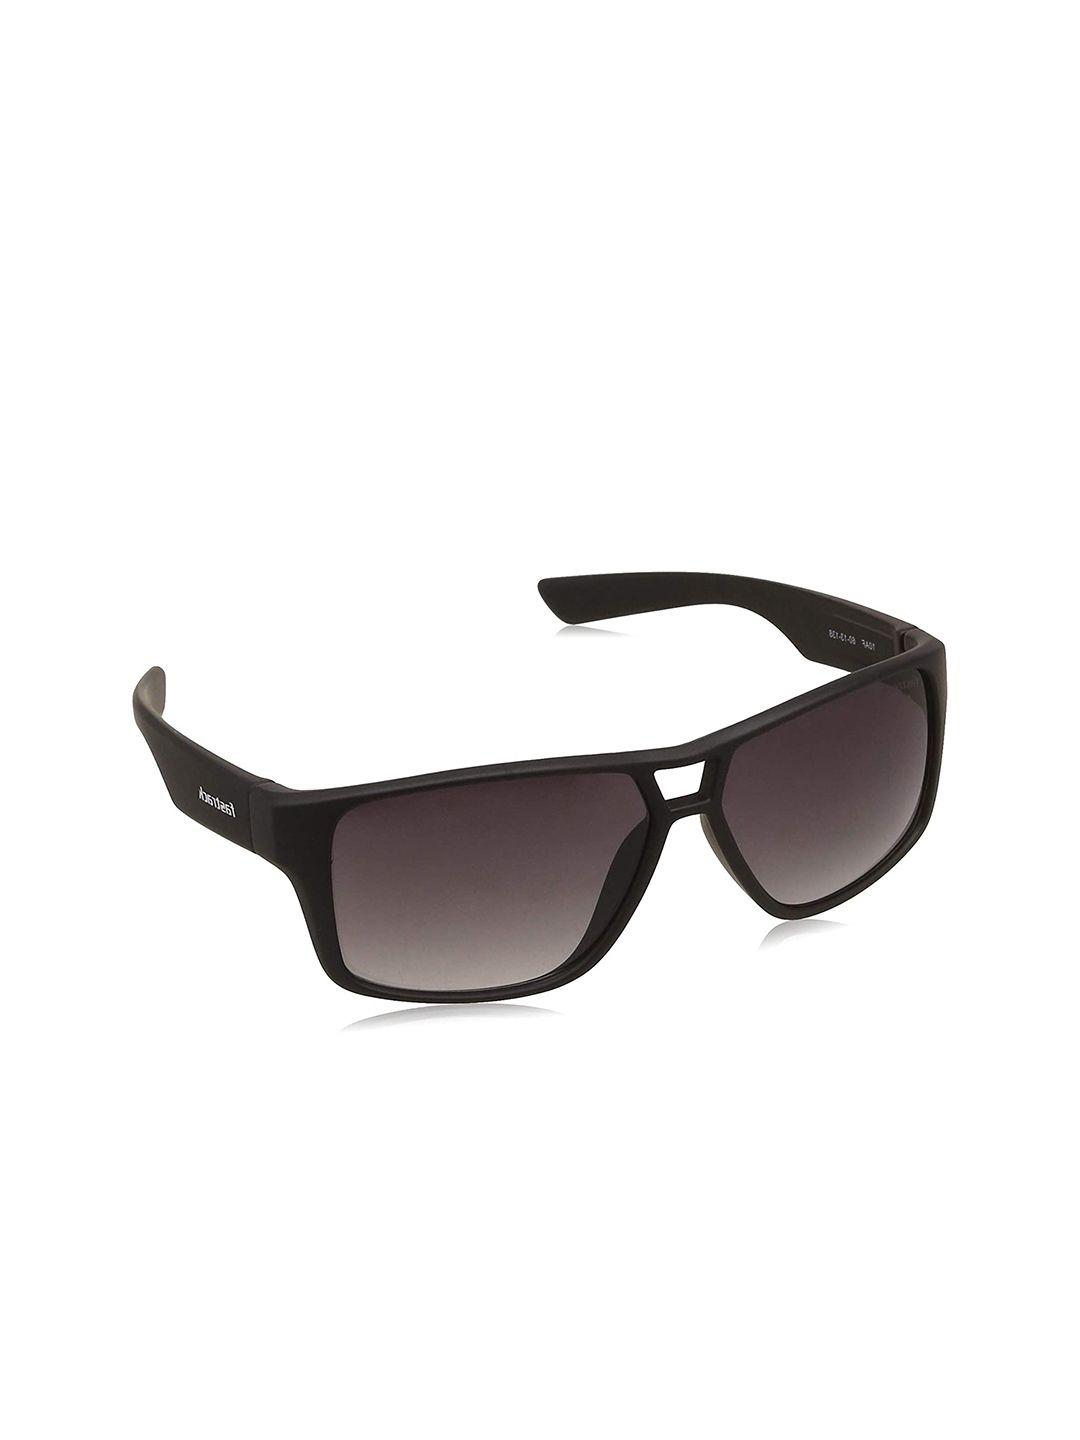 fastrack-unisex-grey-lens-&-brown-square-sunglasses-with-uv-protected-lens